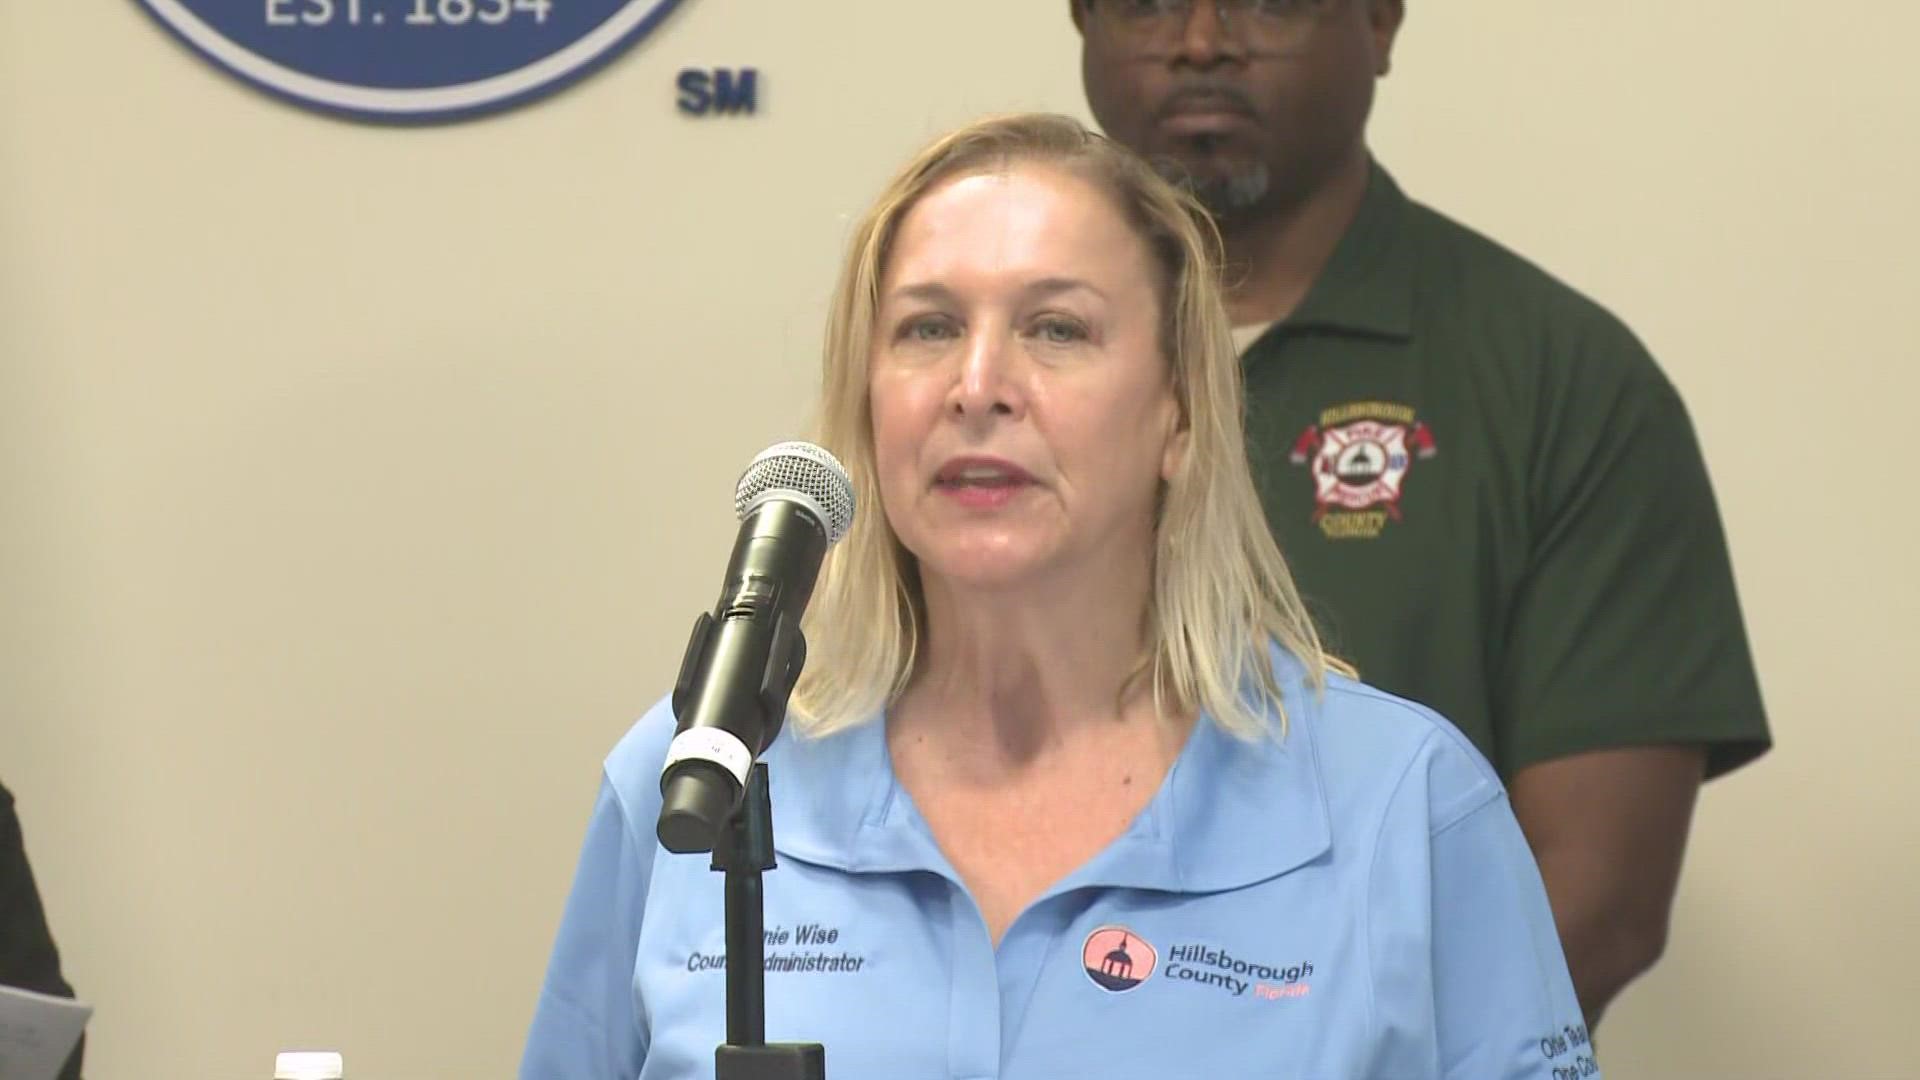 Leaders urge people who are evacuating to get to safety by Tuesday evening.